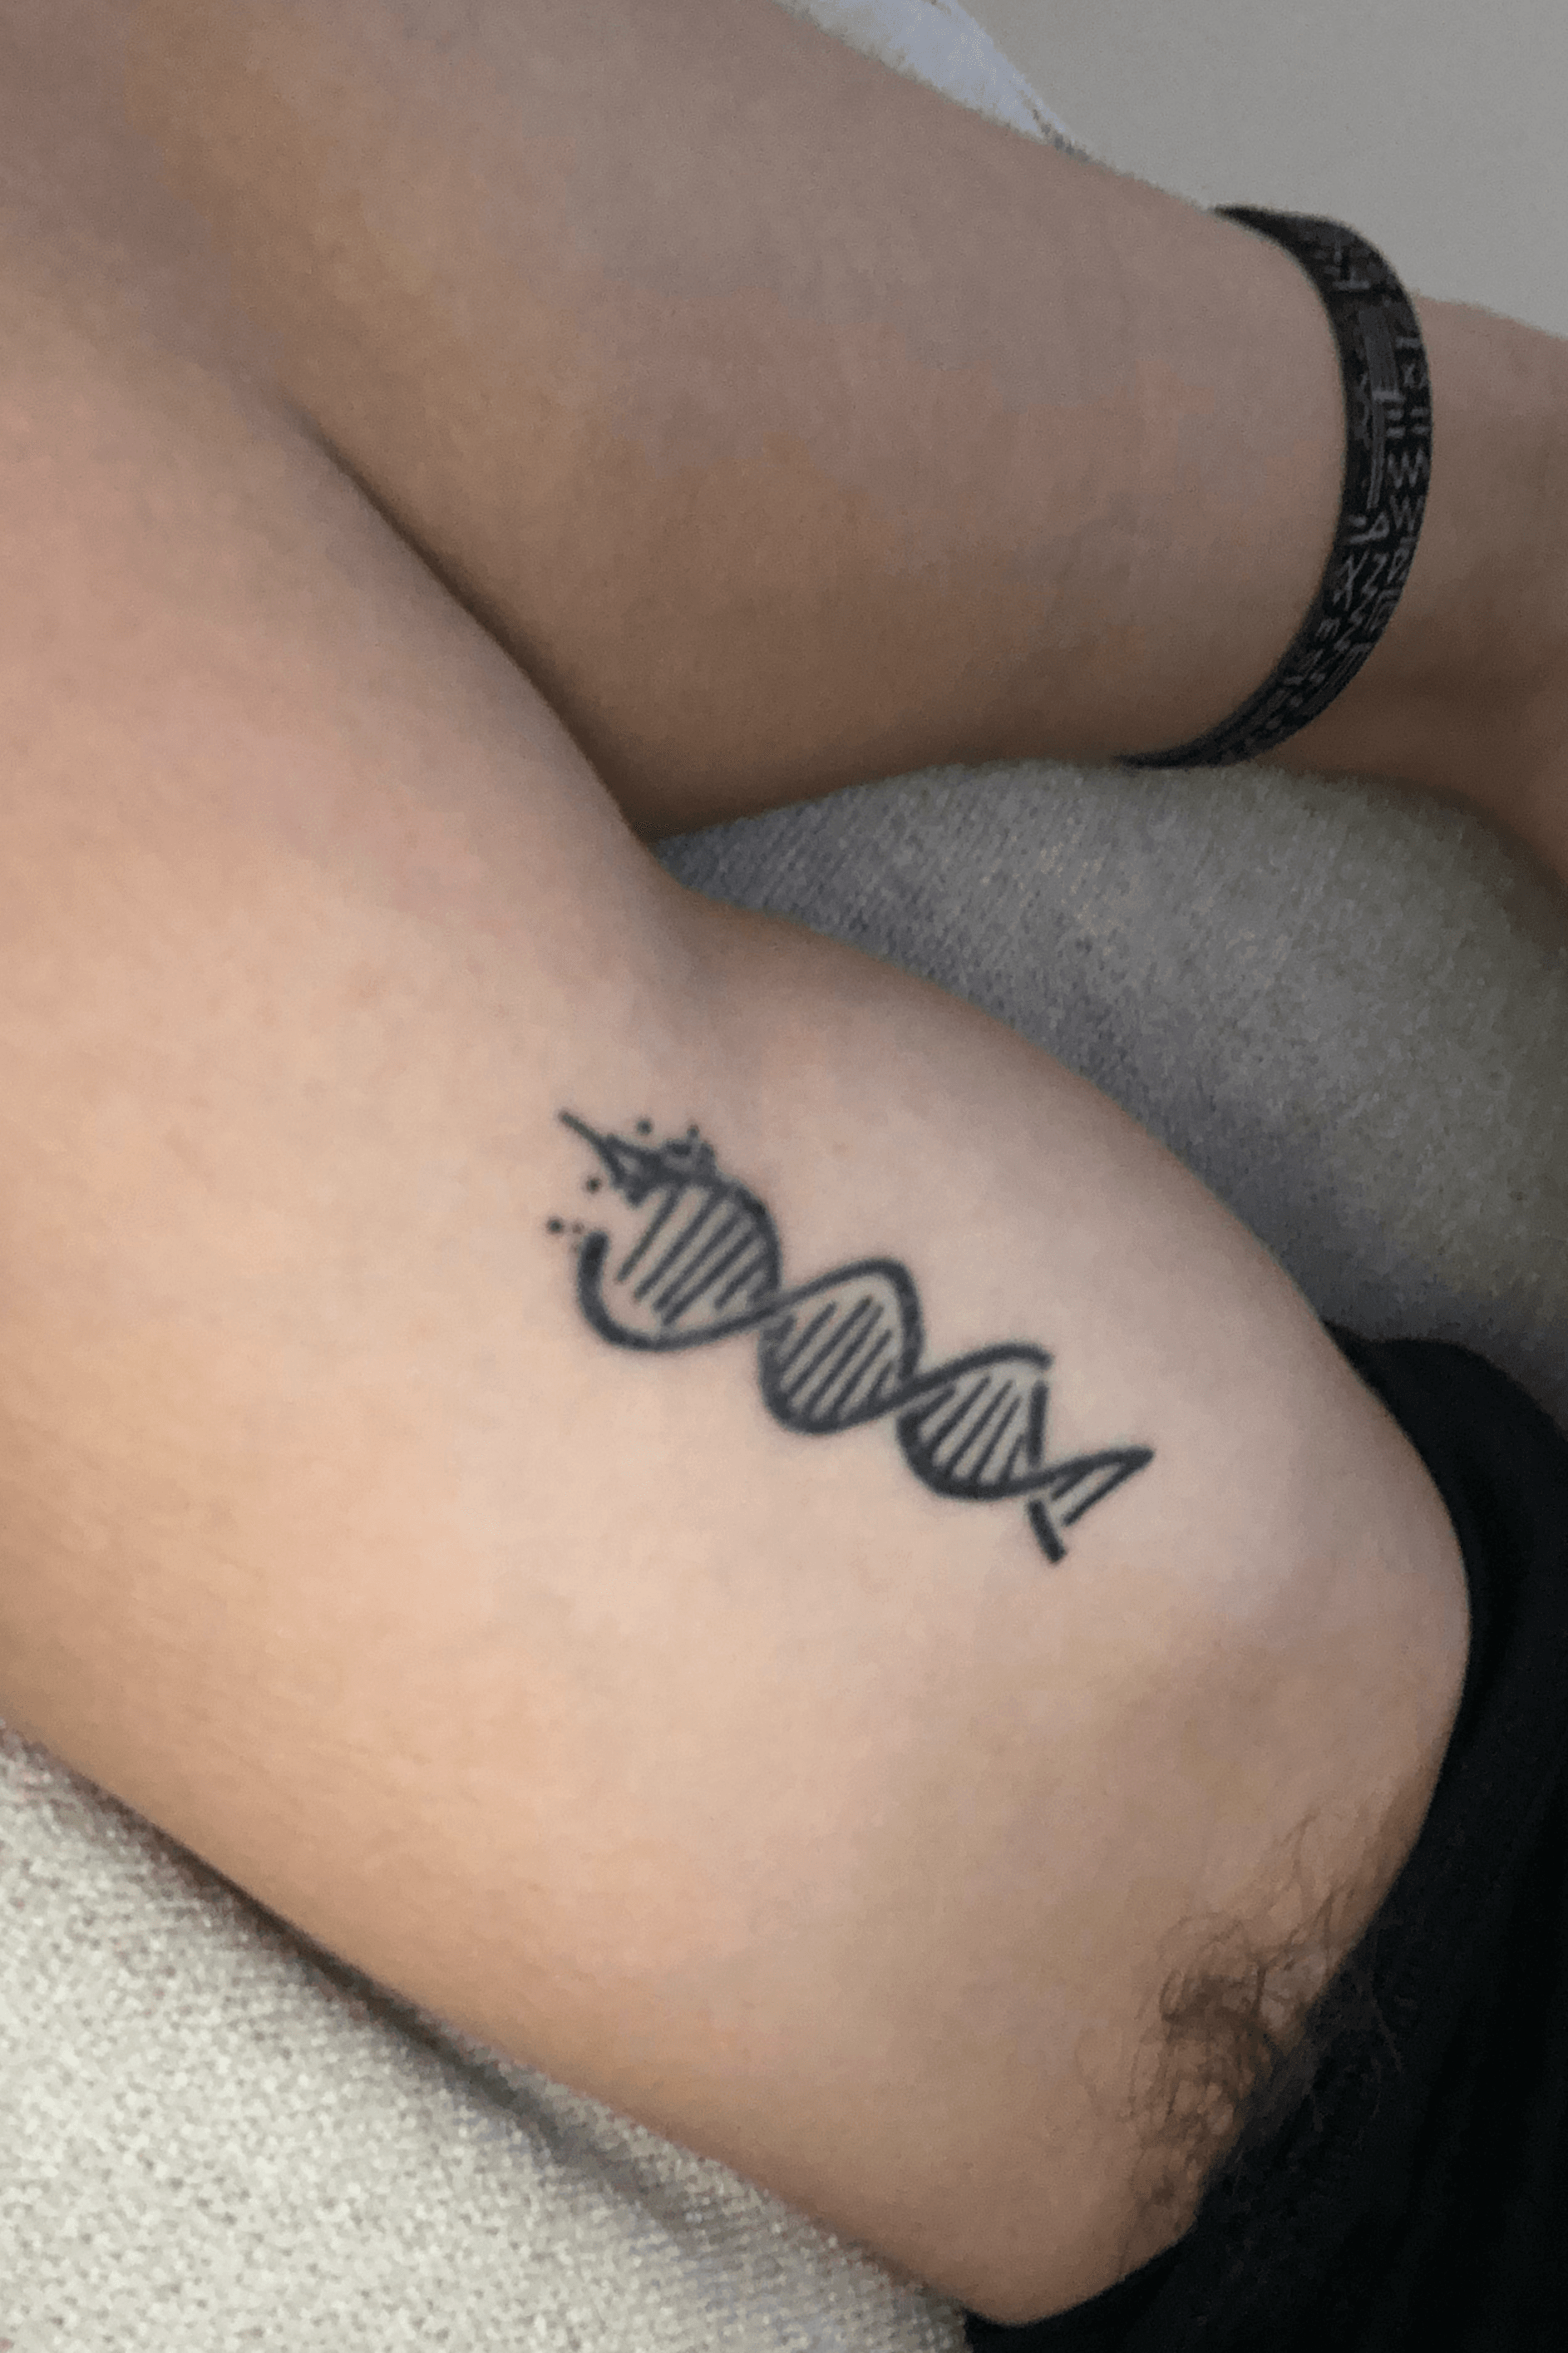 DNA Chain Tattoo  The Book Of Life